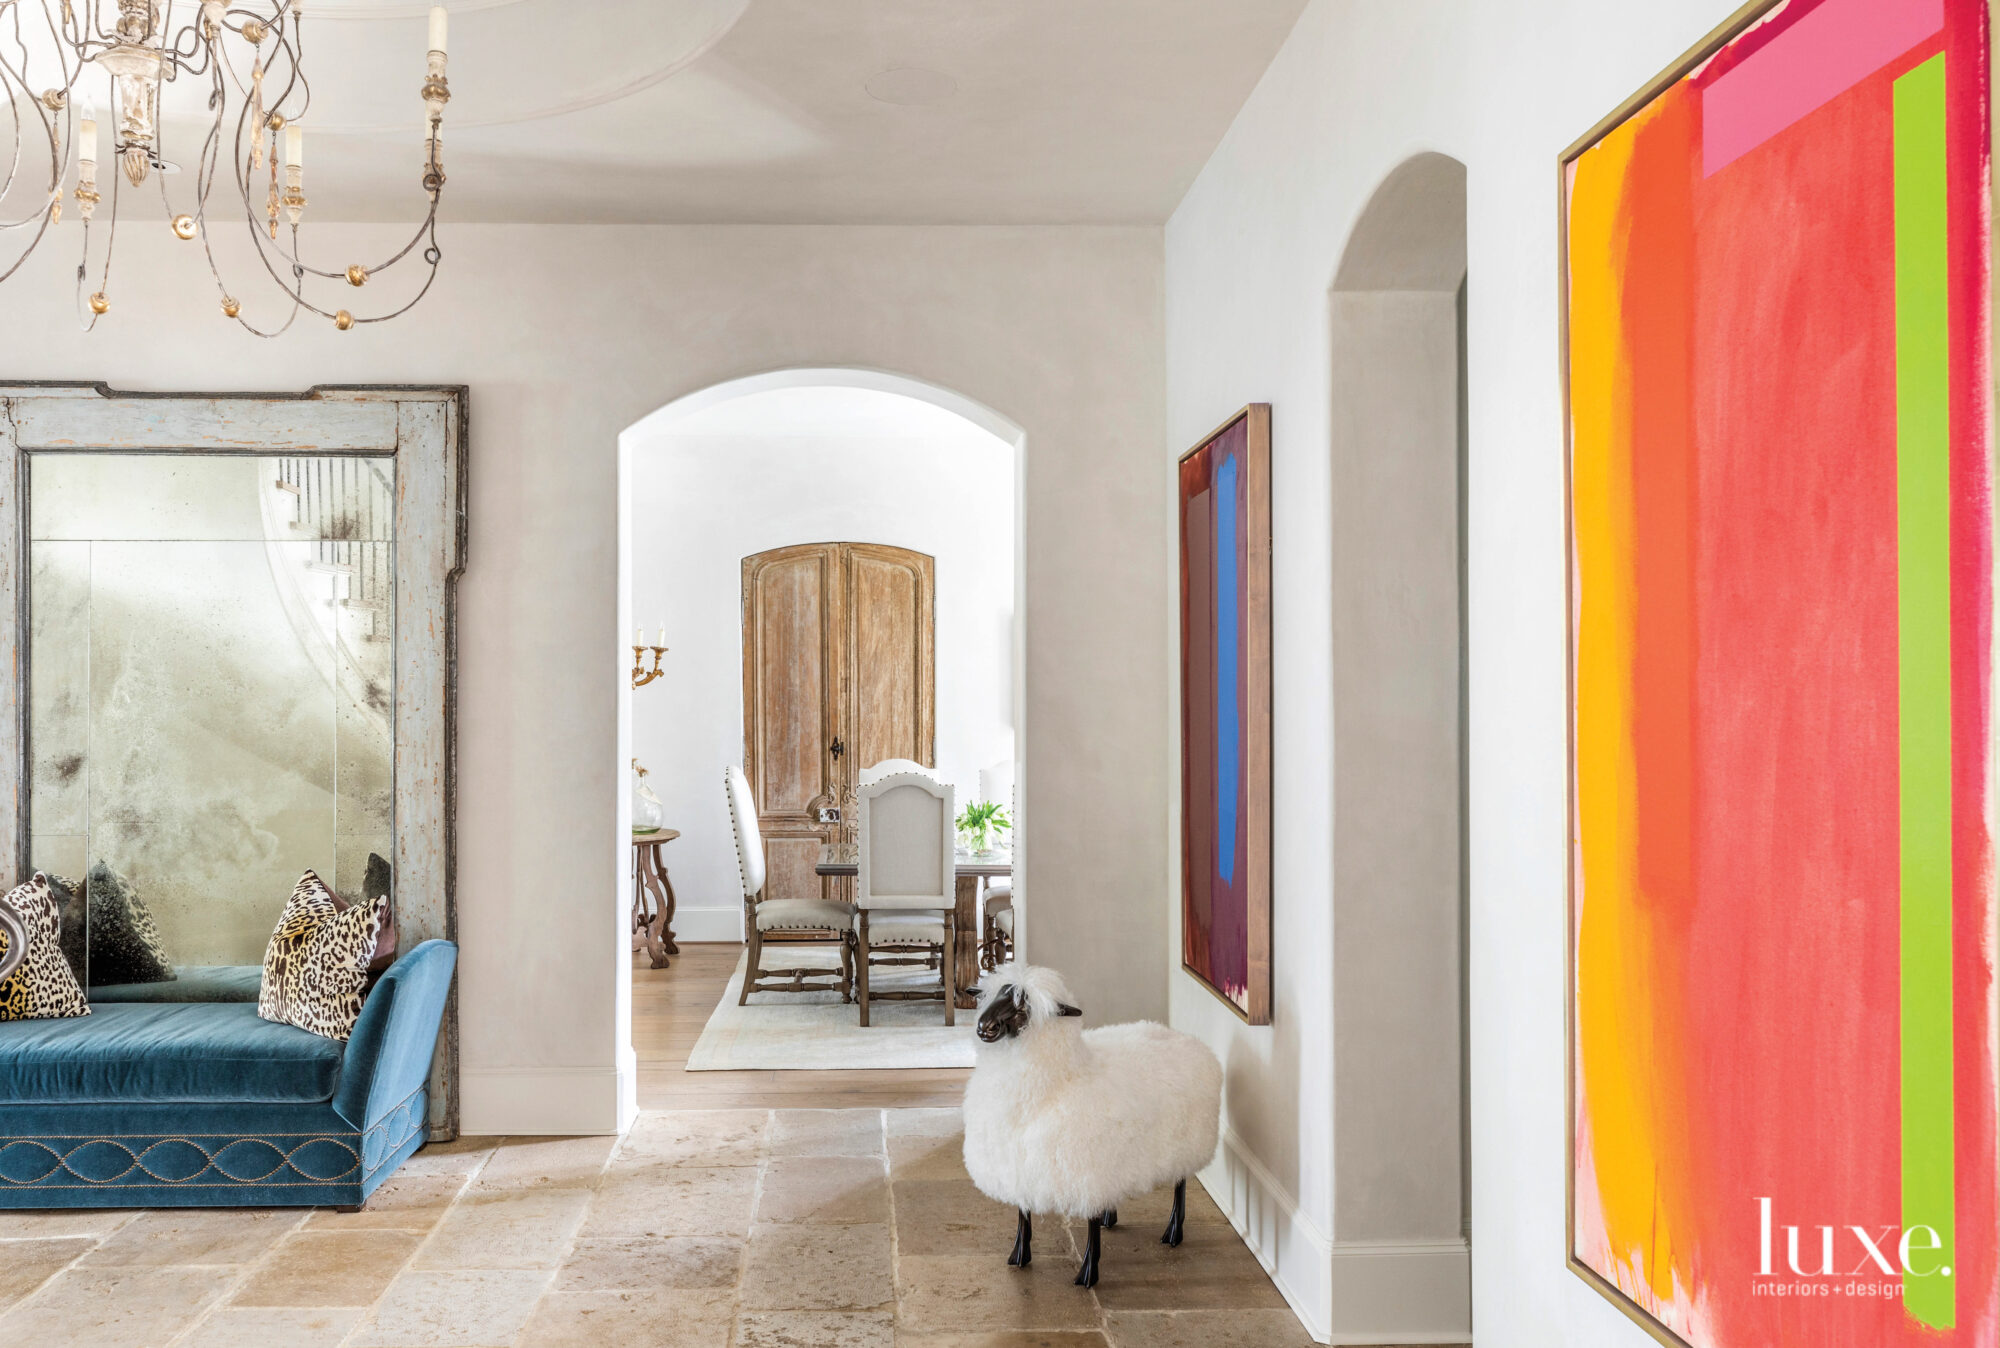 Dining room vestibule with colorful abstract art.